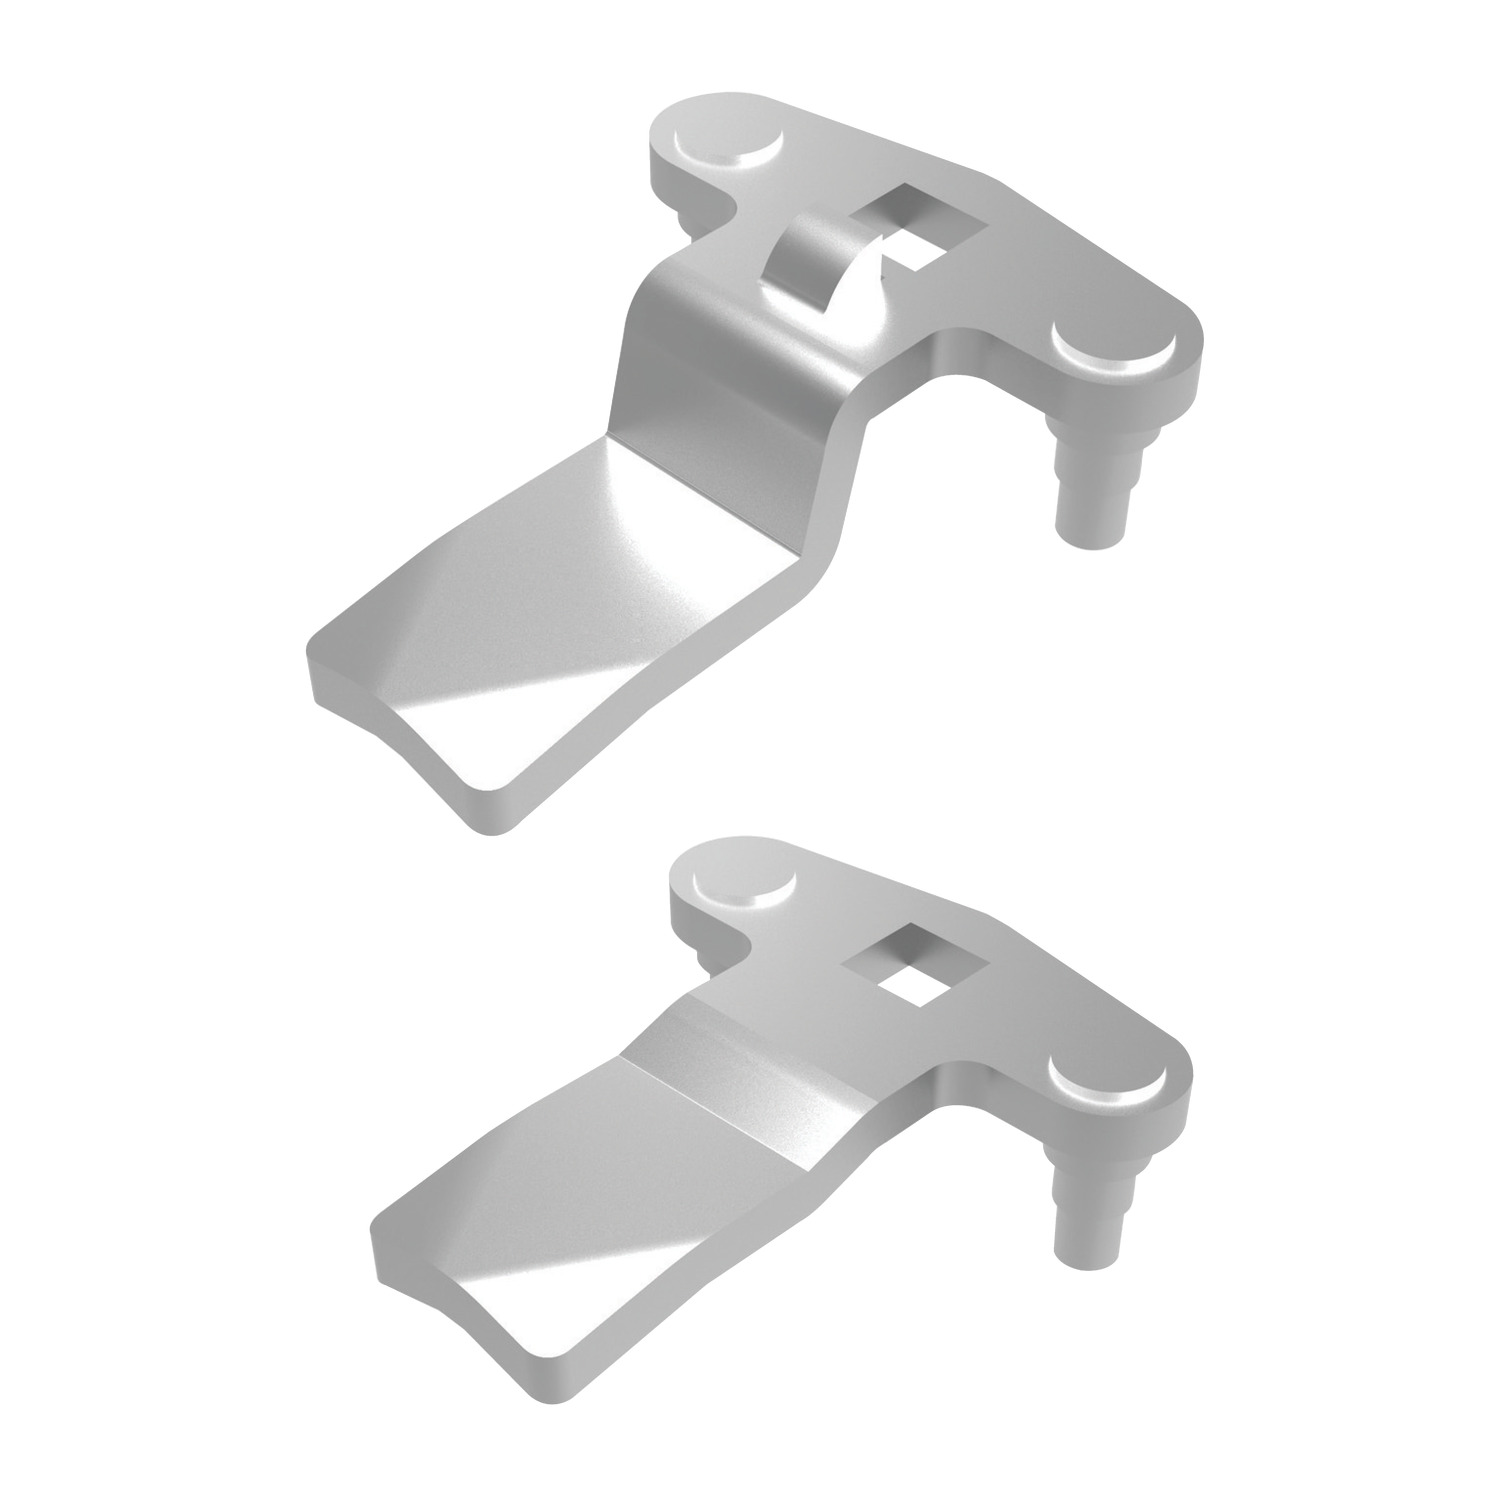 A0240.AW0020 Two Point Cams Flexi for 3-point latching - Steel, zinc plated - With Projection